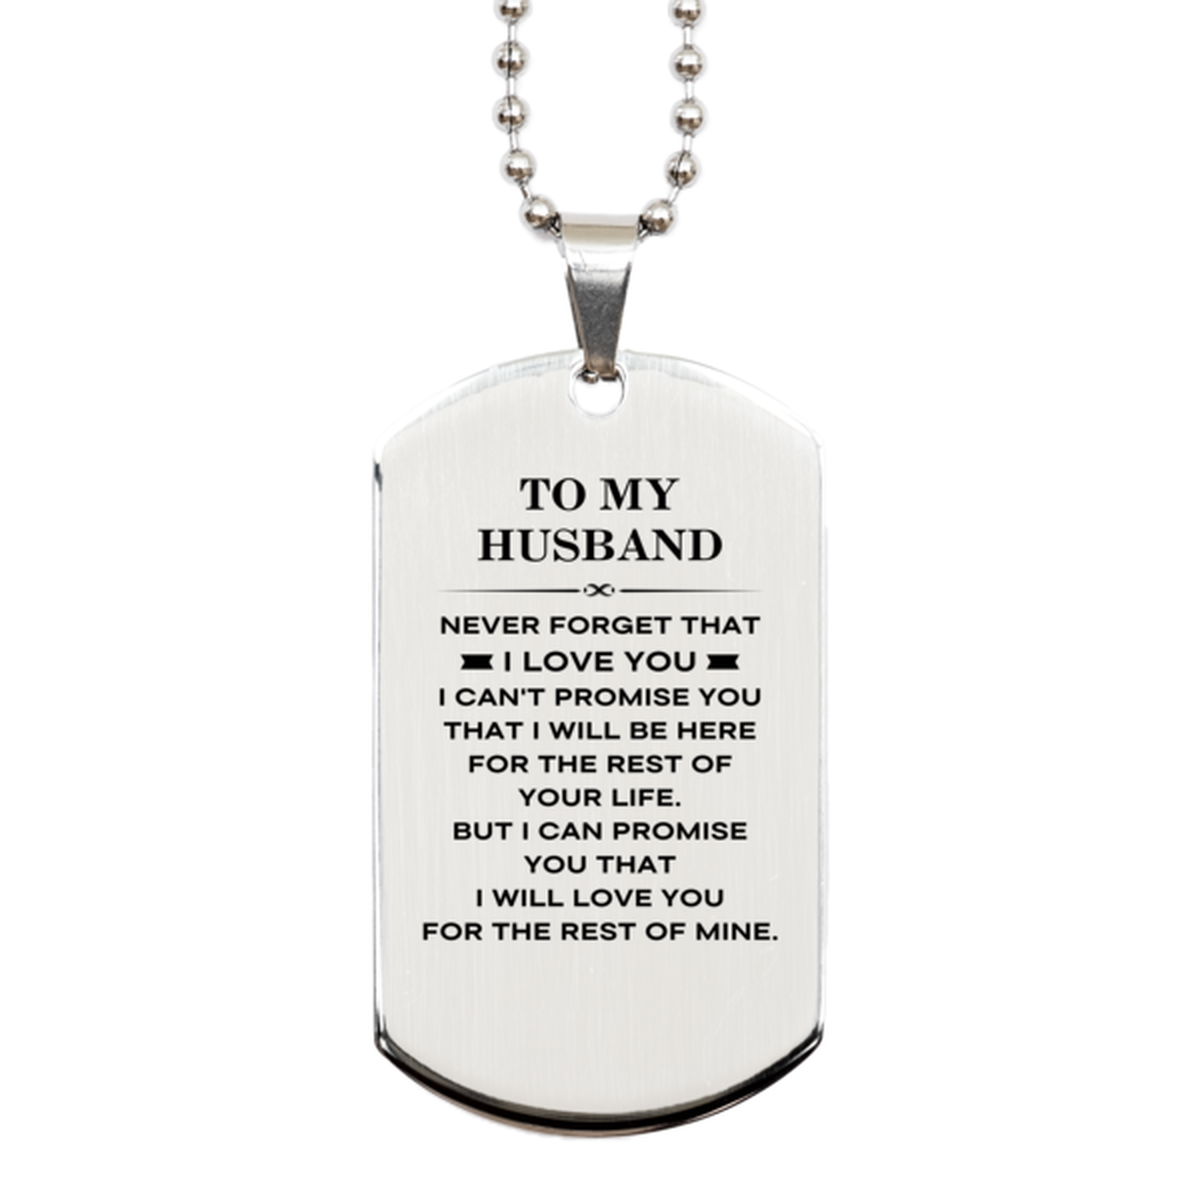 To My Husband Gifts, I will love you for the rest of mine, Love Husband Dog Tag Necklace, Birthday Christmas Unique Silver Dog Tag For Husband